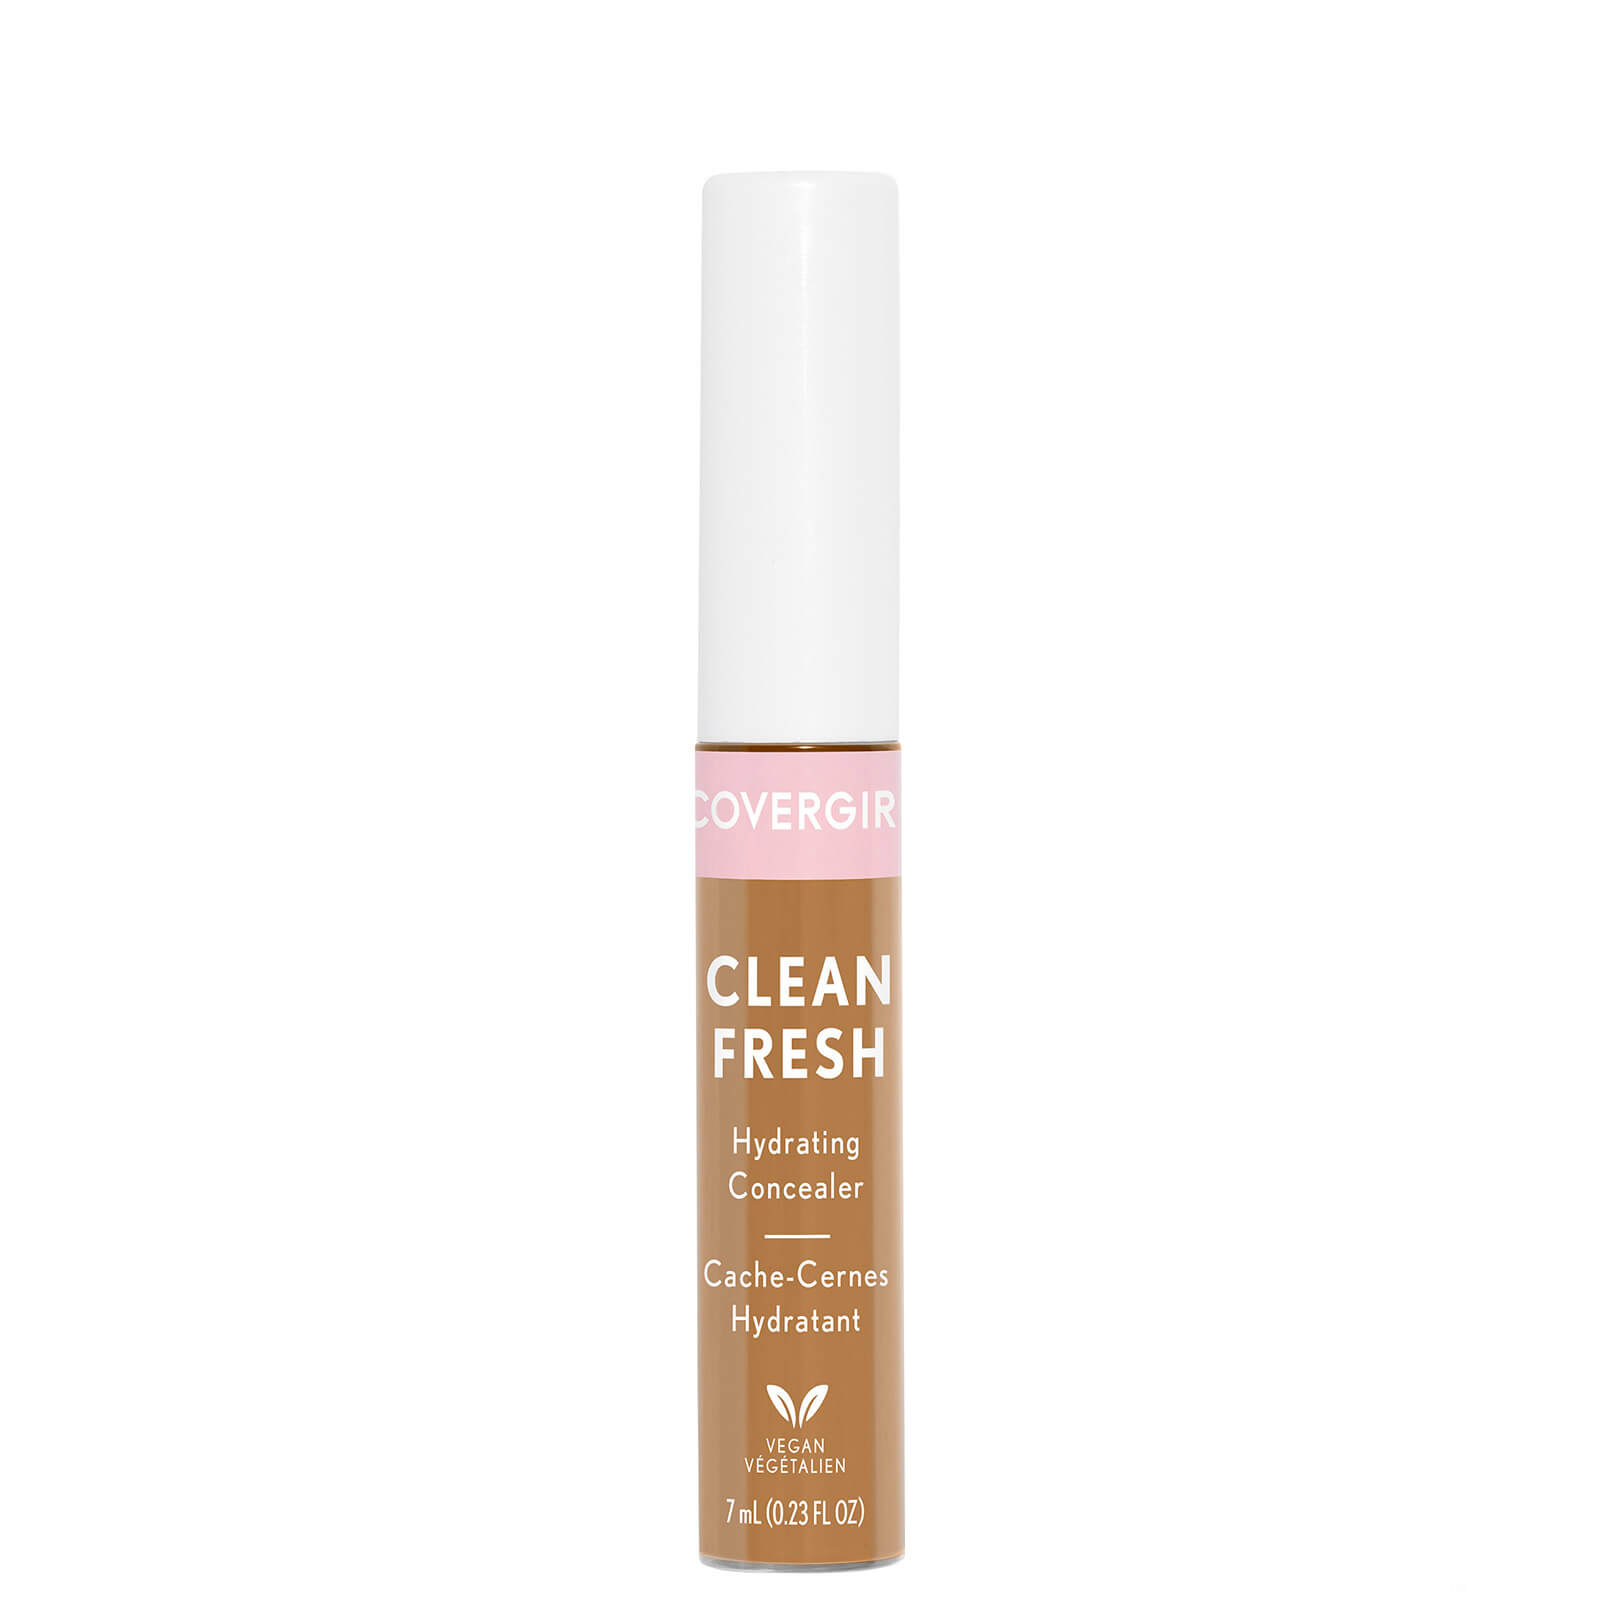 Covergirl Clean Fresh Hydrating Concealer 0.23 oz (Various Shades) - Tan Rich